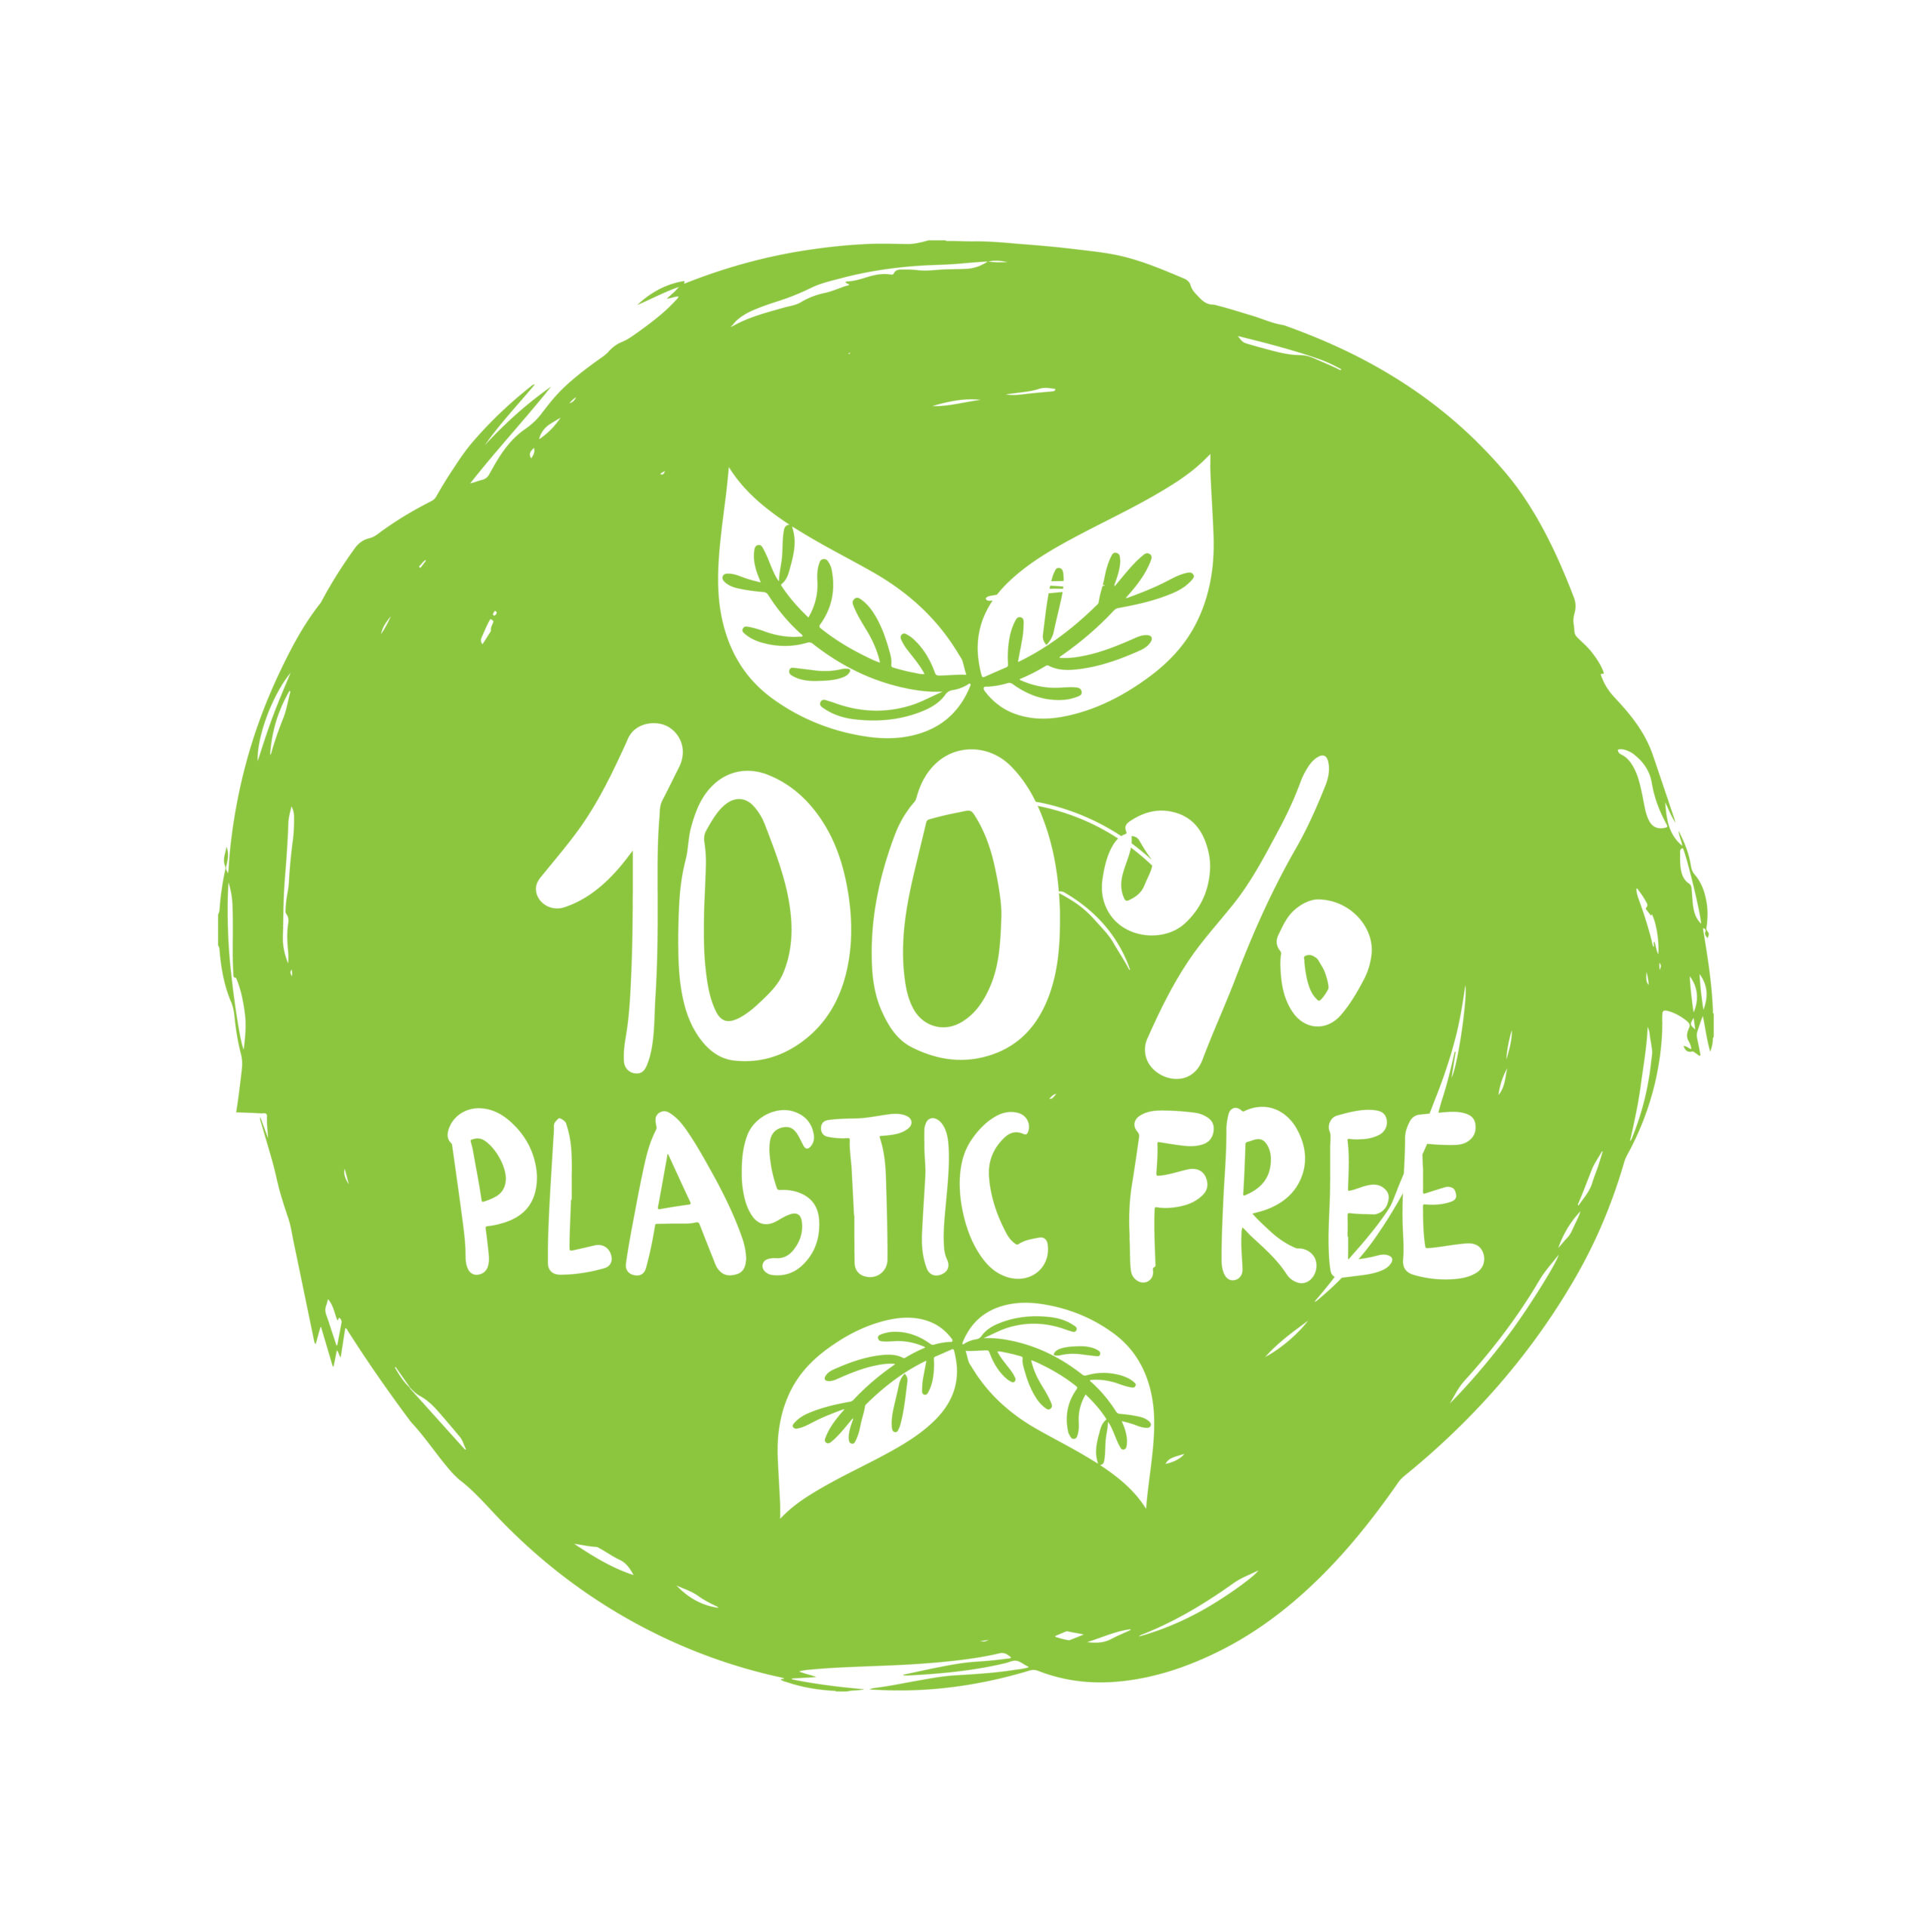 tips to make your business plastic free